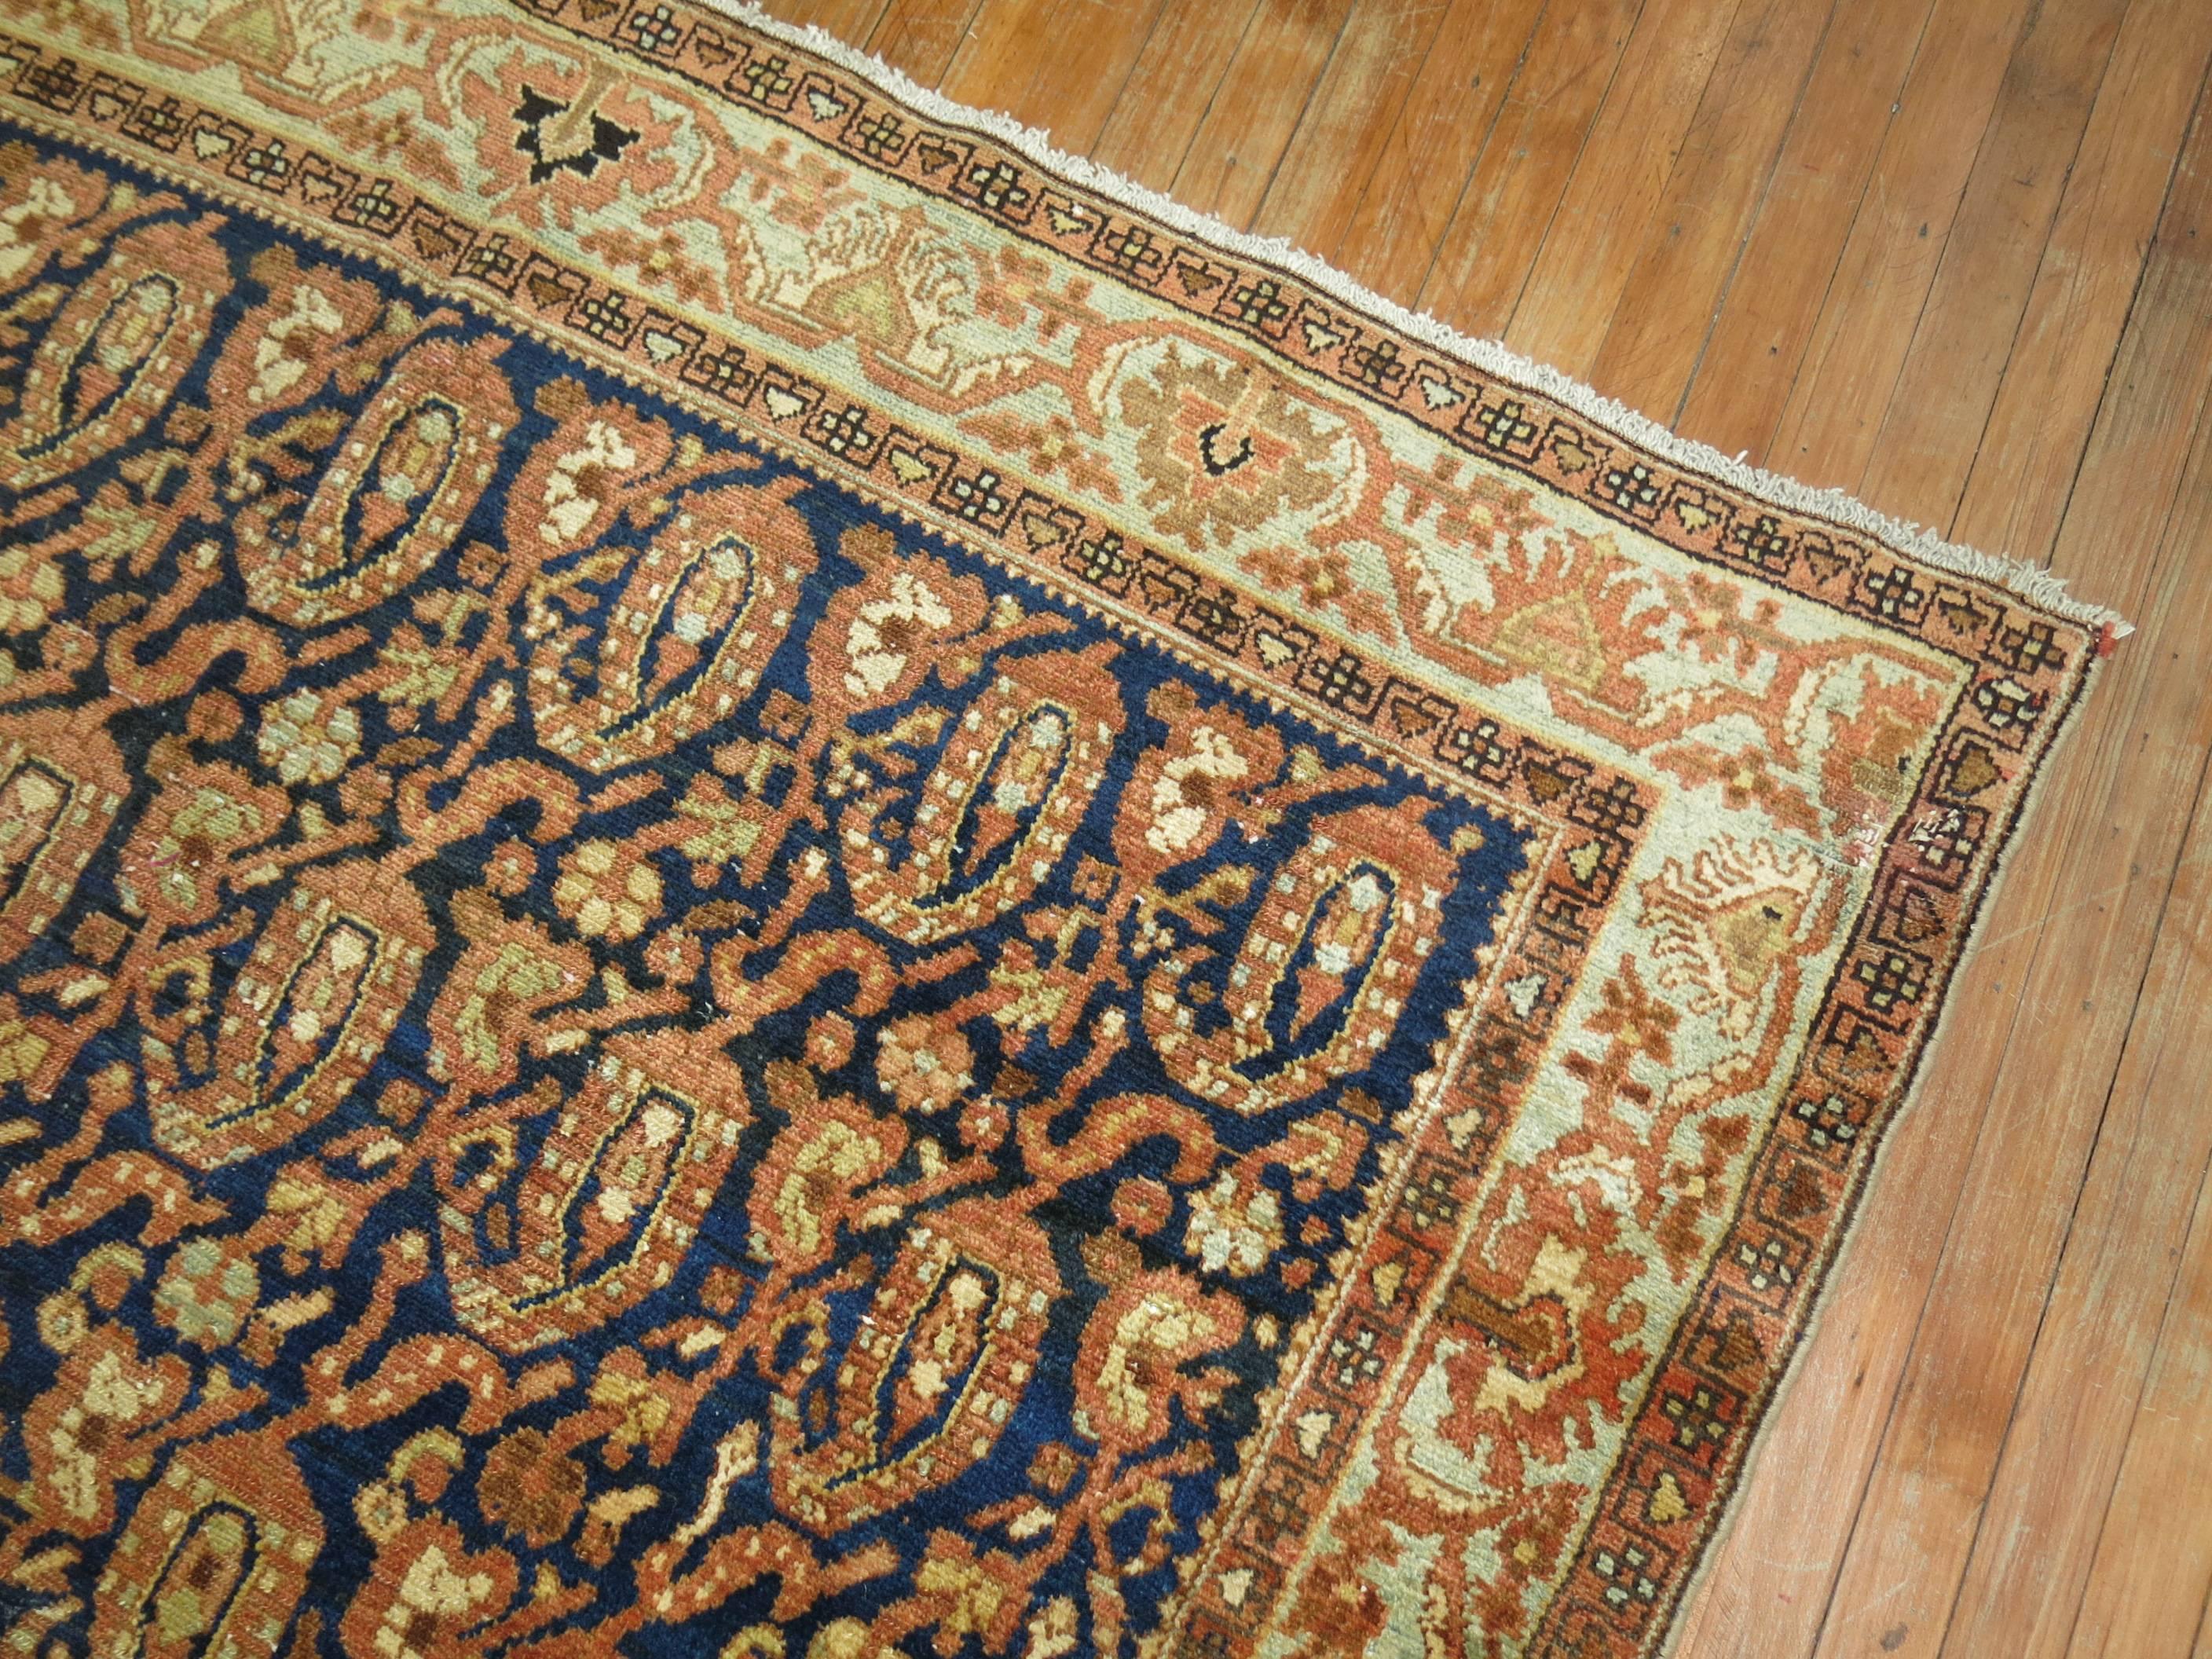 A Persian Malayer gallery rug featured a large-scale all-over paisley design in blues and terracotta, circa 1920.

Measures: 6'7'' x 13'6''.